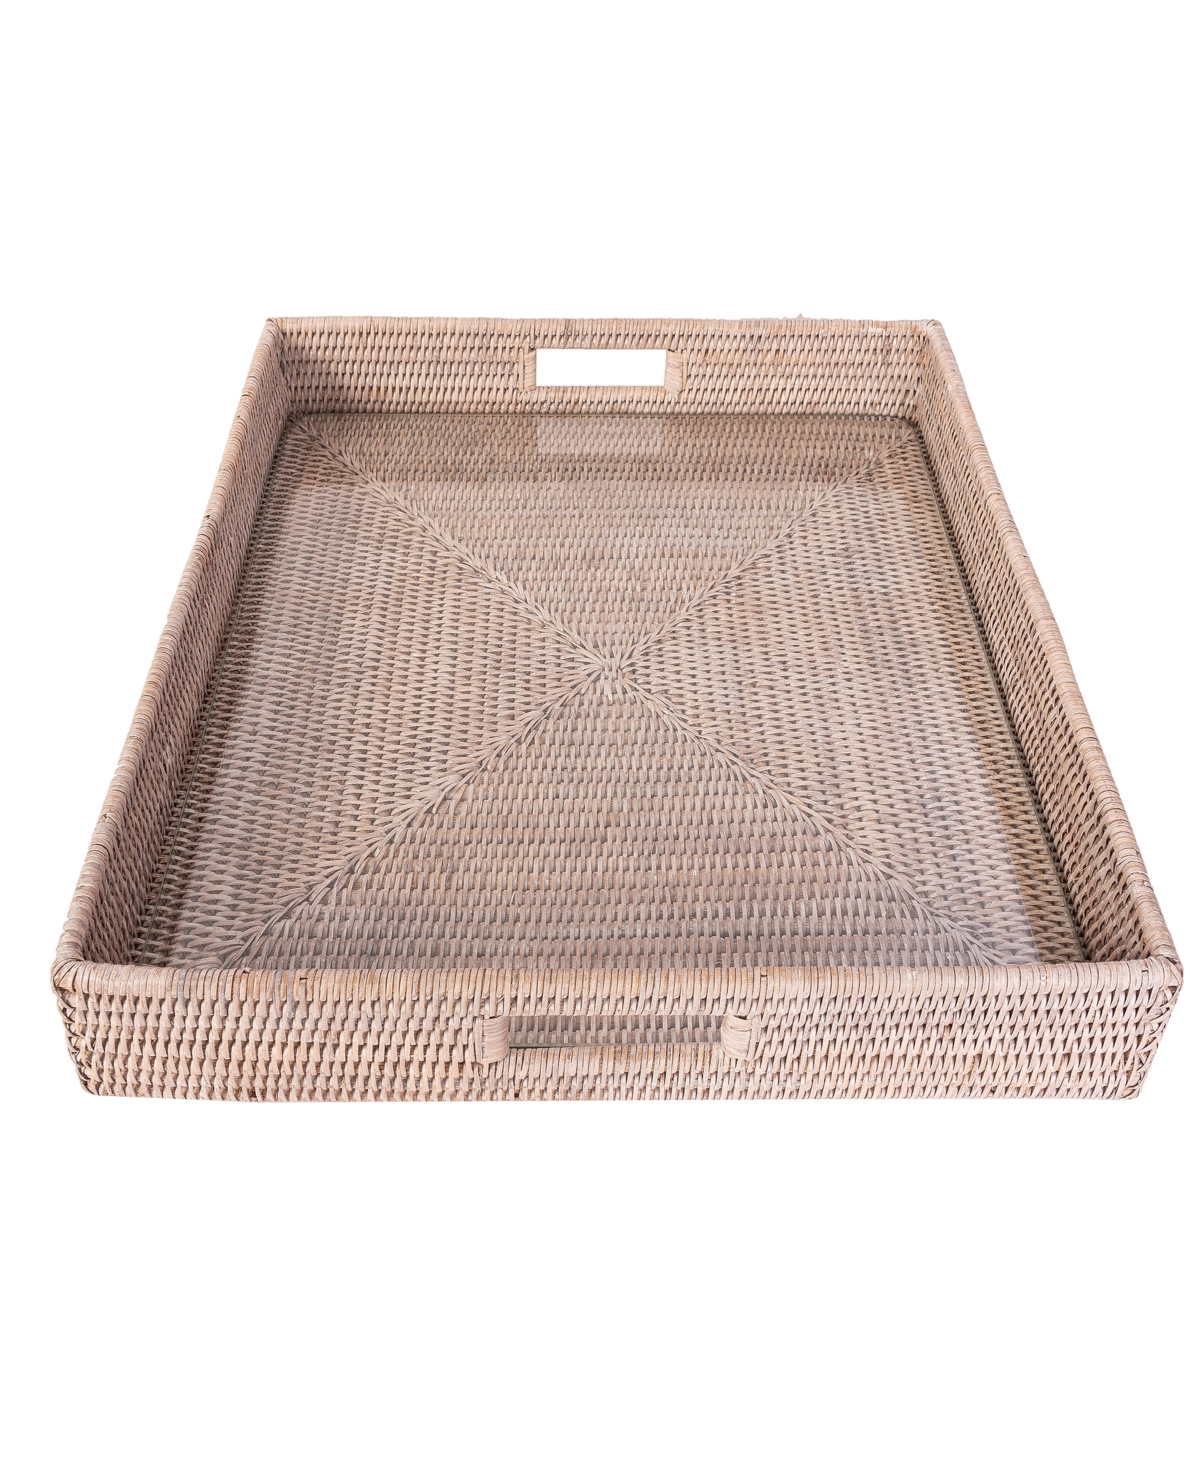 Artifacts Trading Company Artifacts Rattan Square Serving Ottoman Tray With Glass Insert In White Wash